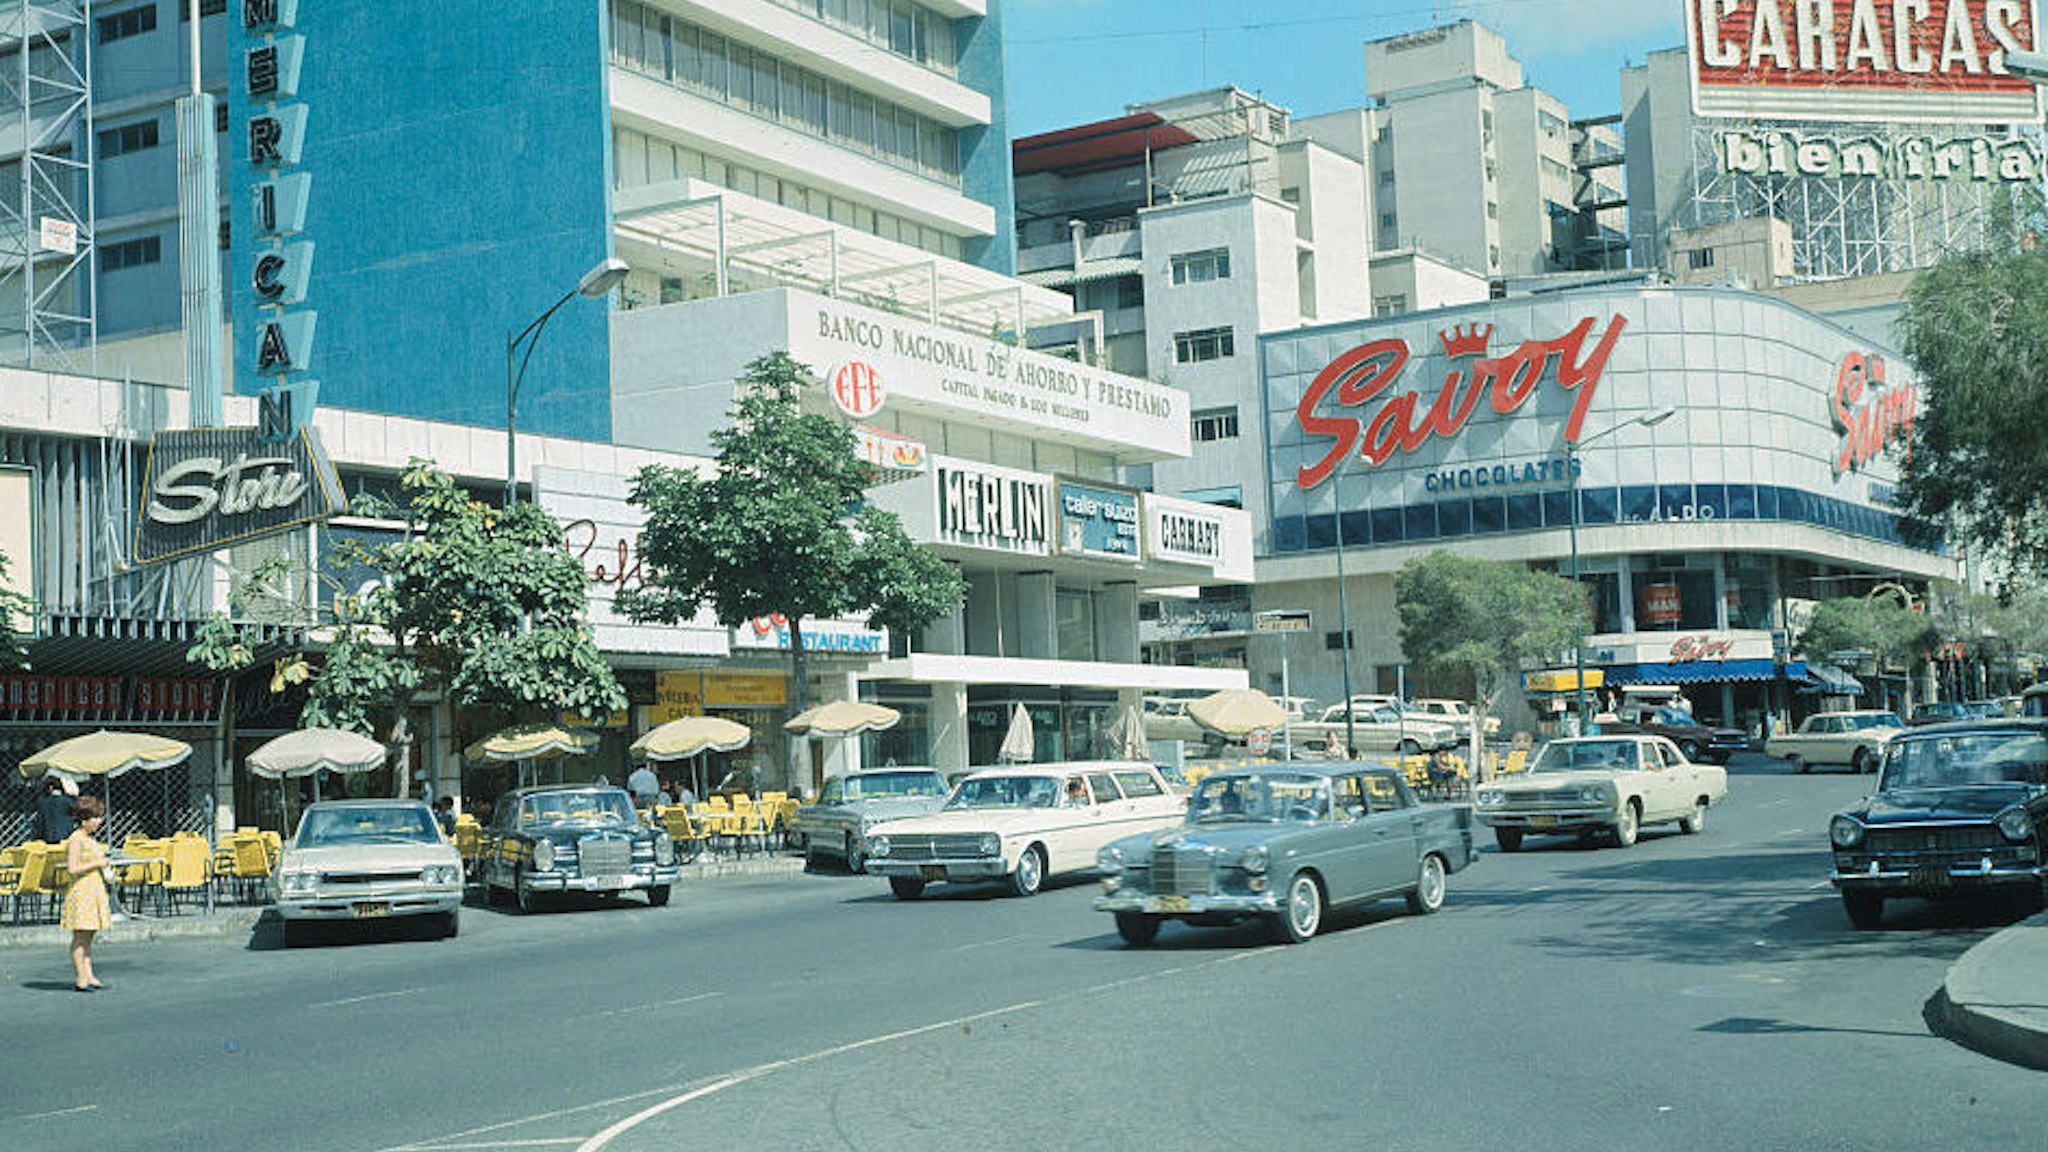 Caracas, Venezuela: Sabana Grande, Caracas' plush shopping district, is dotted with sidewalk cafes, showing the influence of half a million Spanish and Italian residents here.